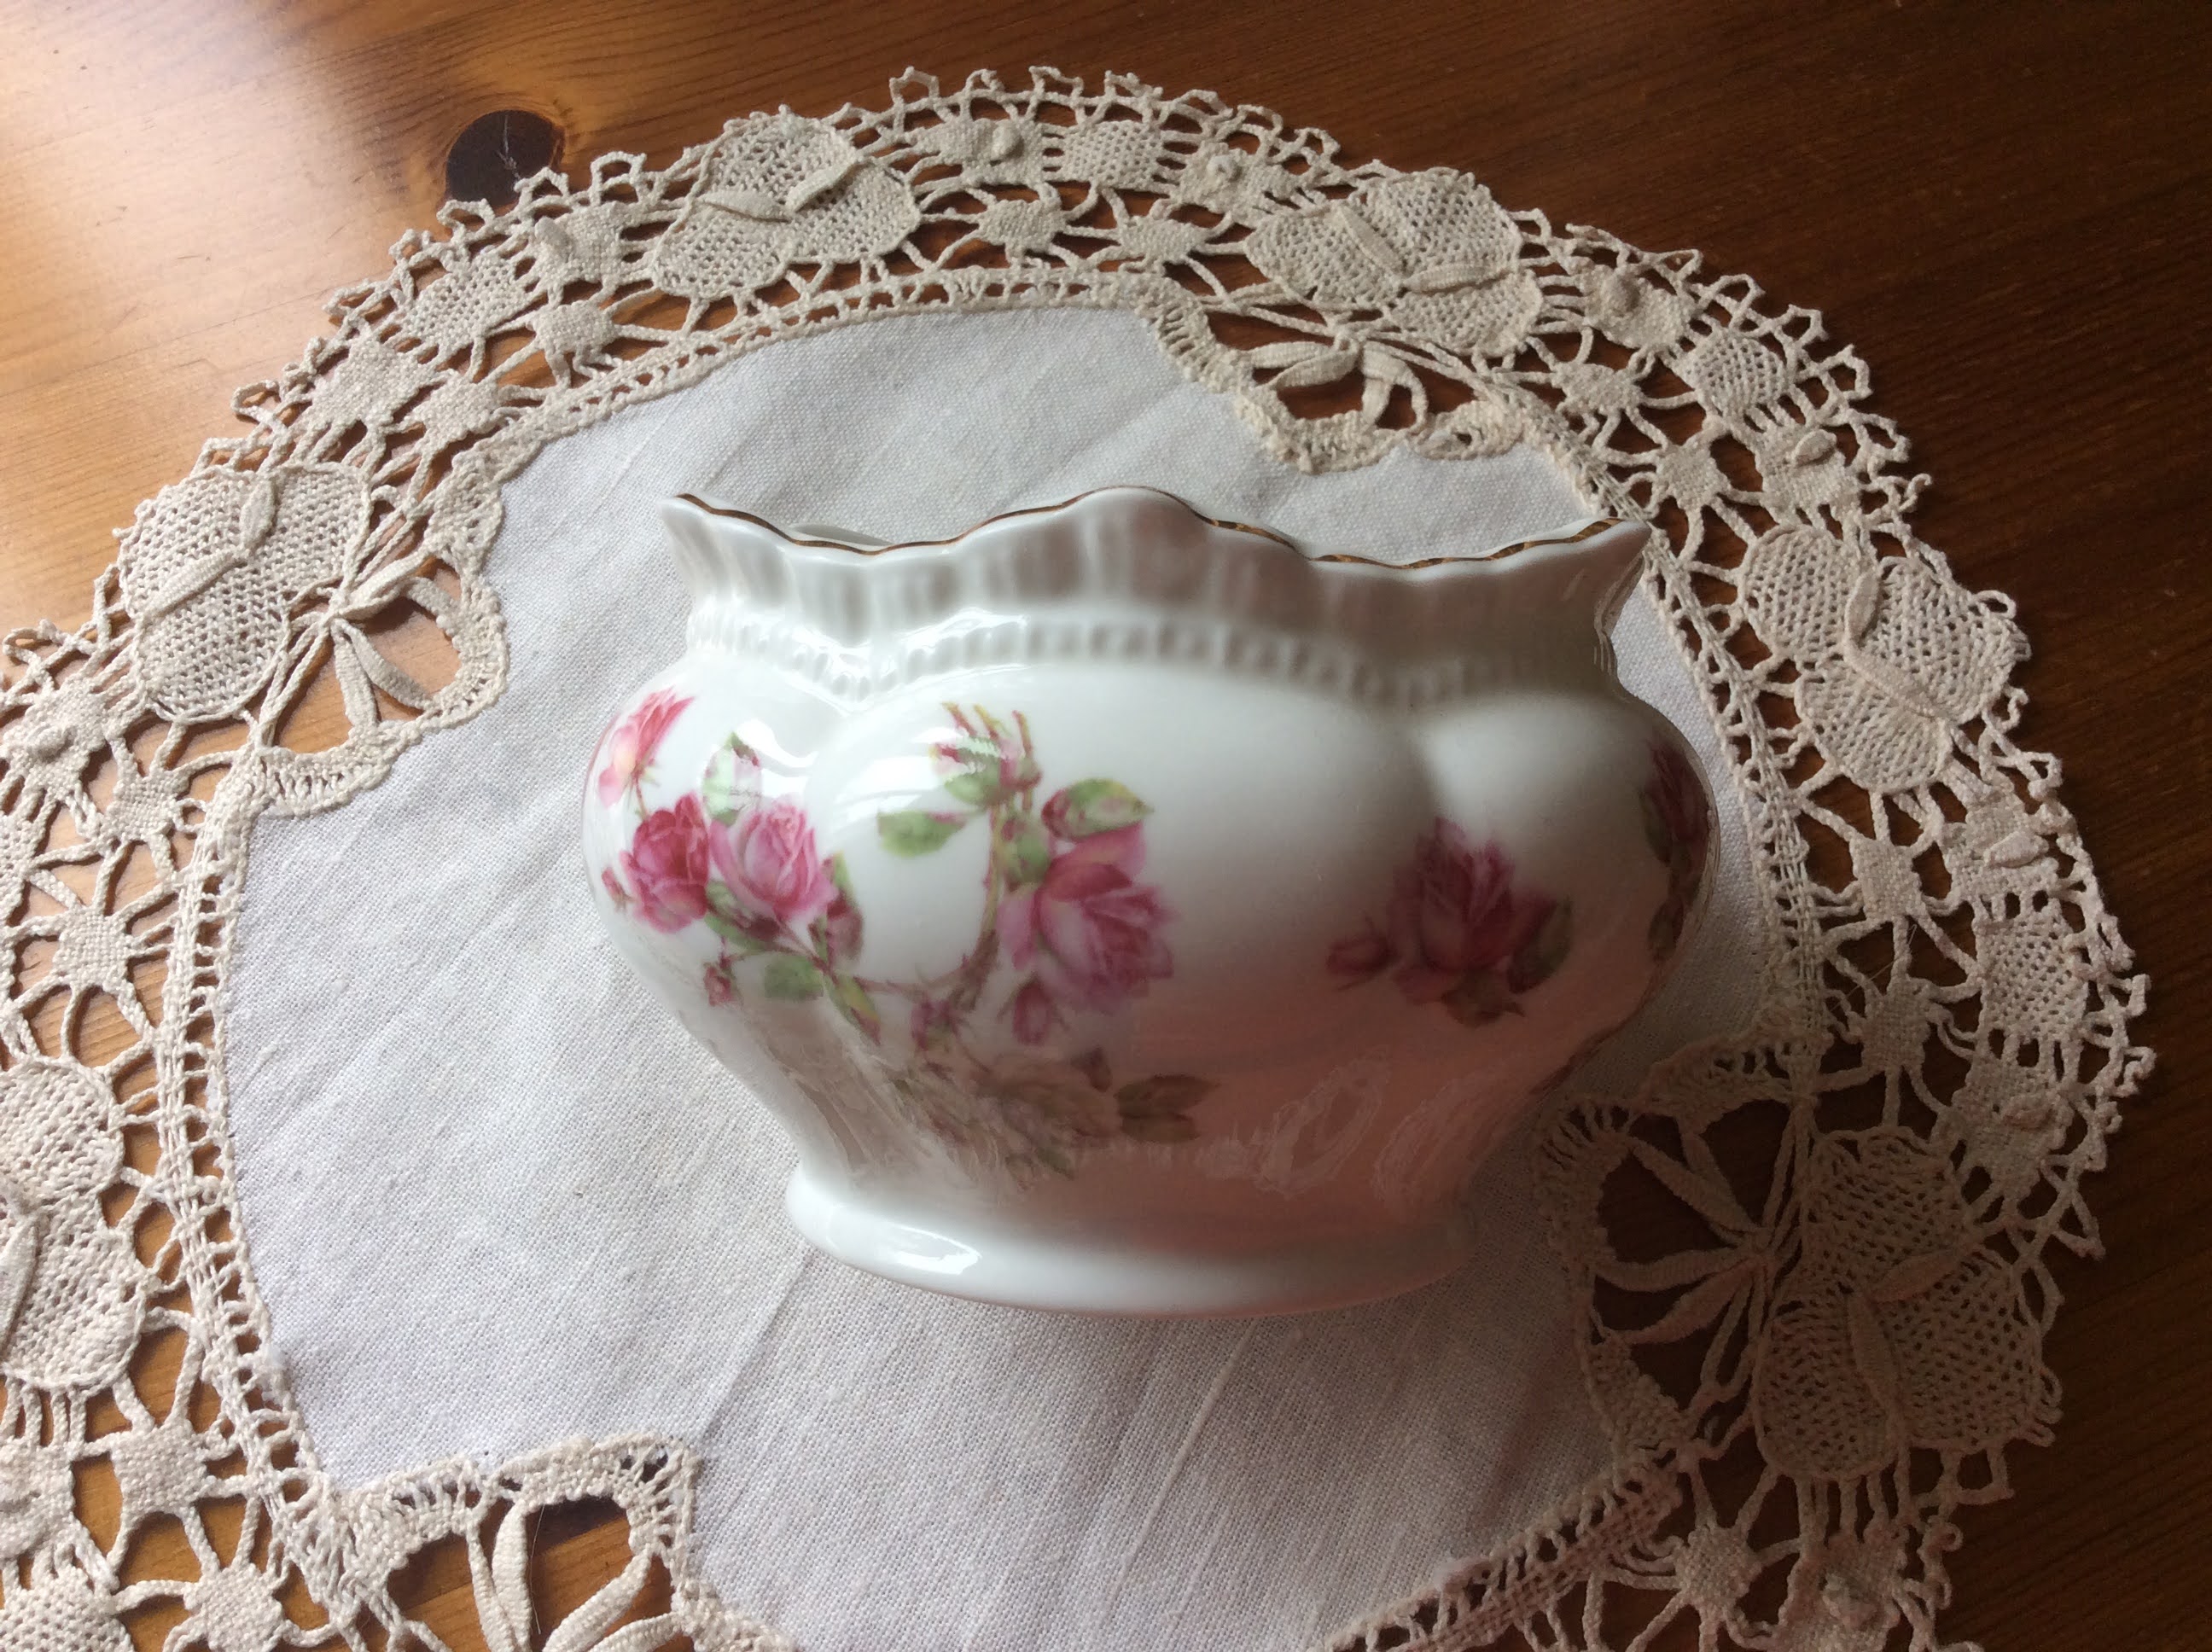 Small Vintage Posy Bowl - Aynsley pink roses